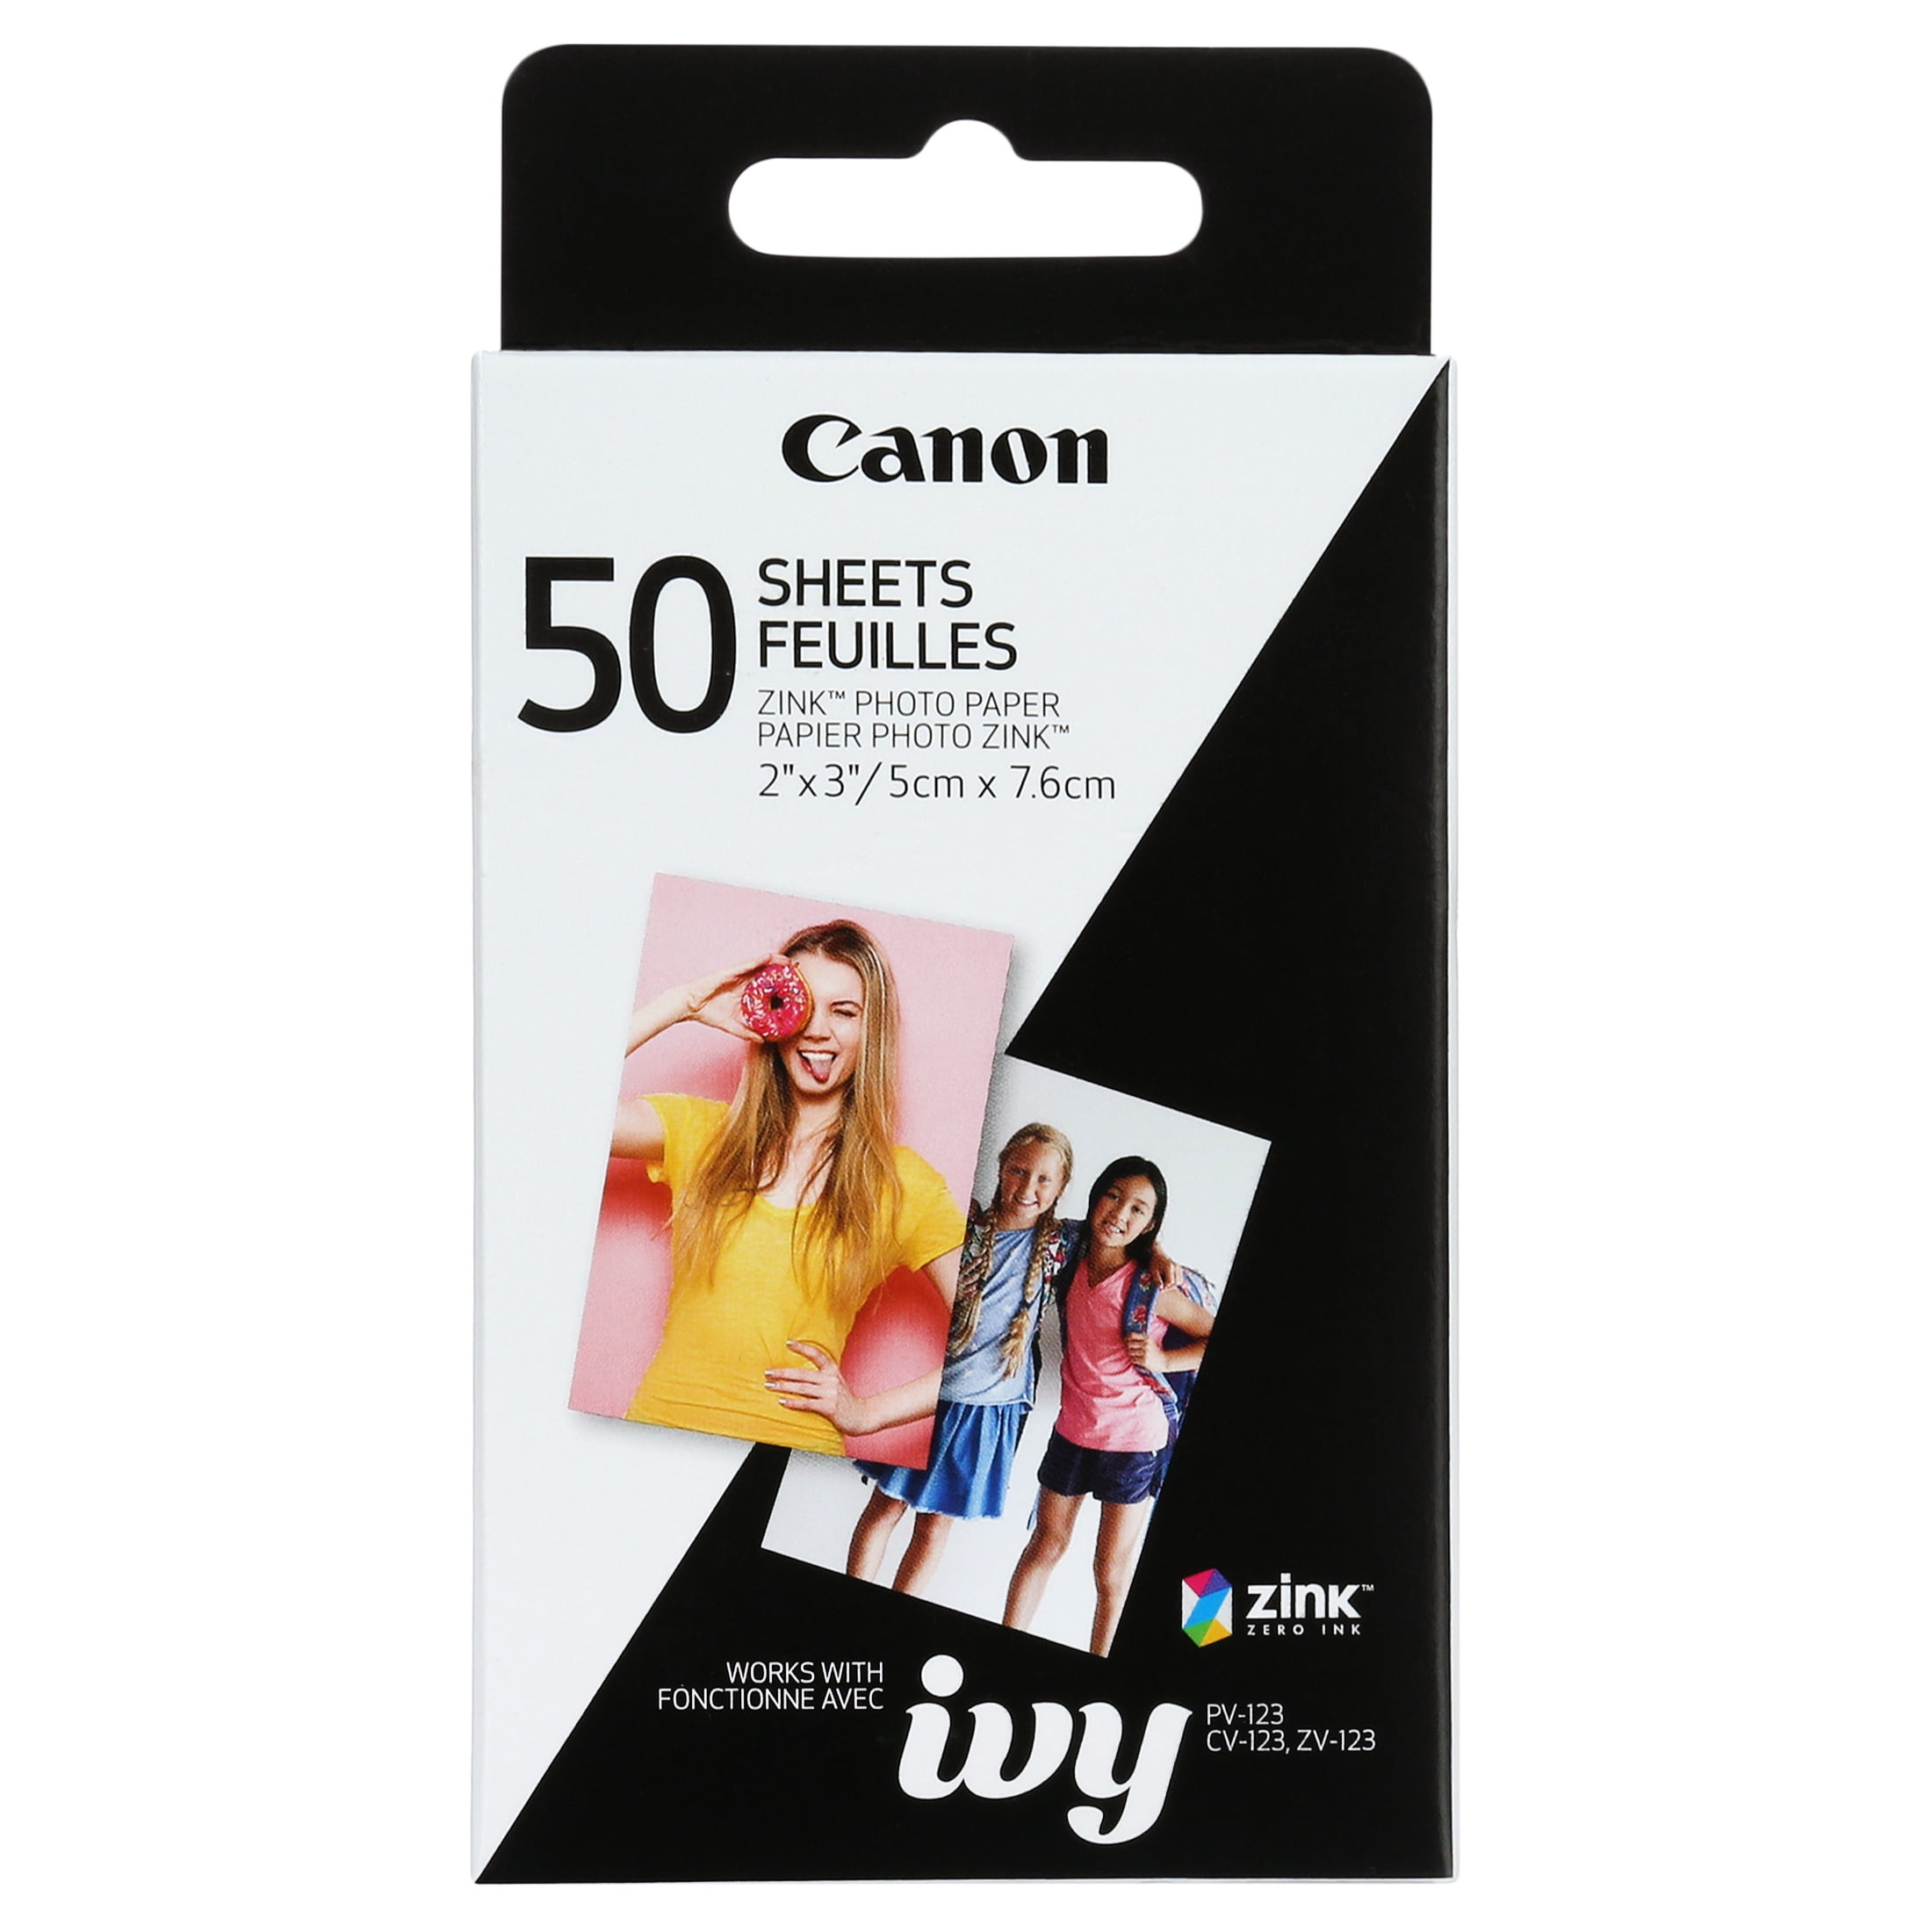 Canon ZINKTM Photo Paper Pack - 50 Sheets